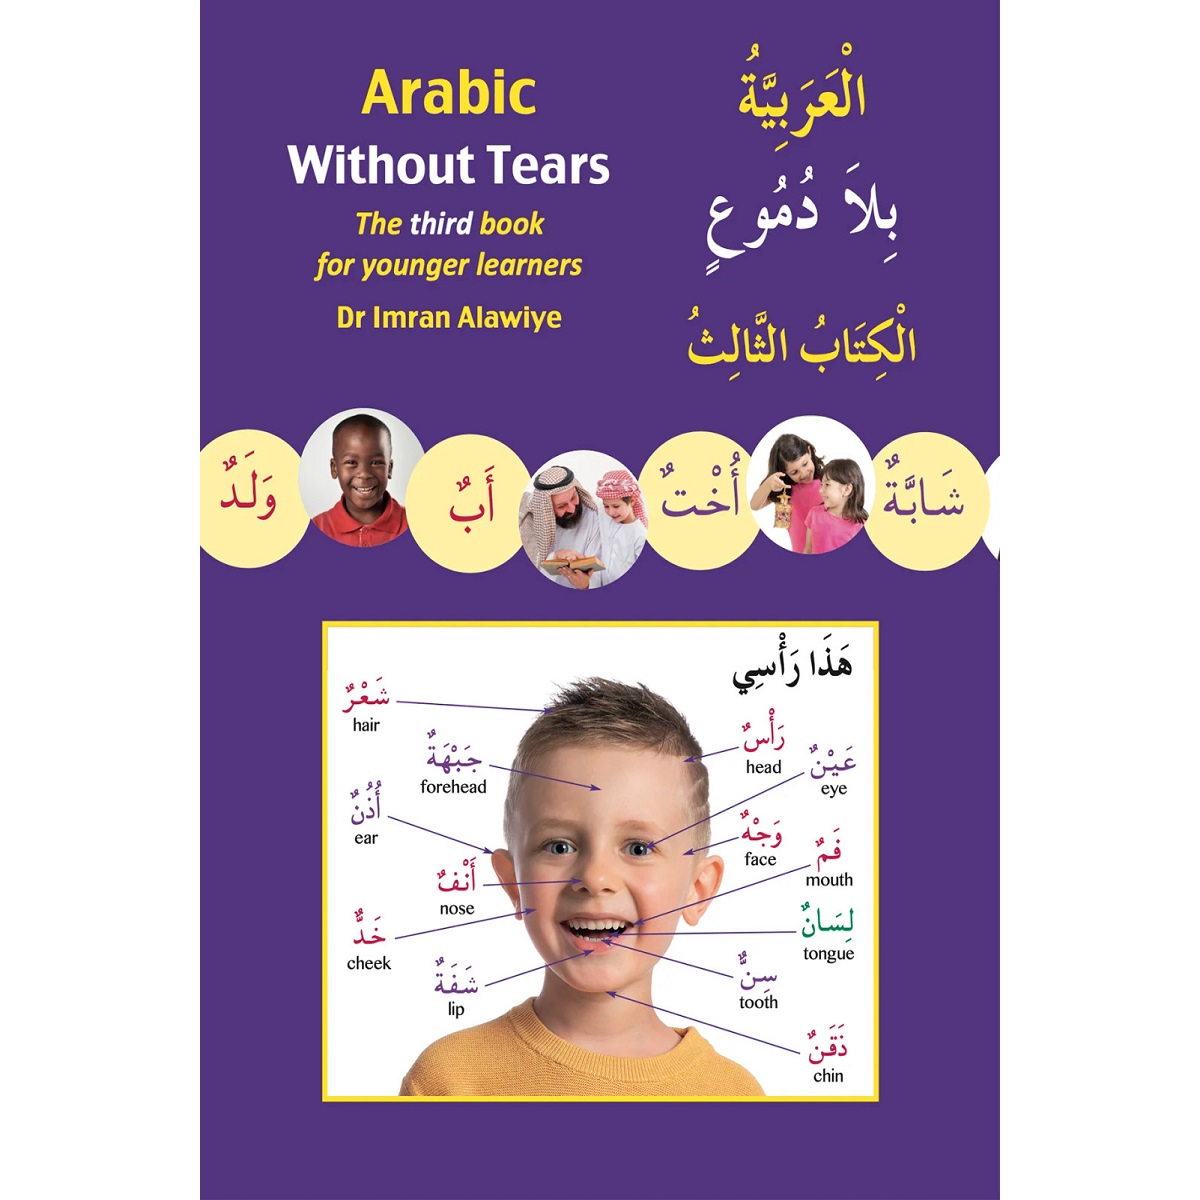 https://www.tarbiyahbooksplus.com/shop/islamic-books-and-products-for-children/arabic-without-tears-book-3-the-third-book-for-younger-learners-paperback-by-imran-hamza-alawiye/